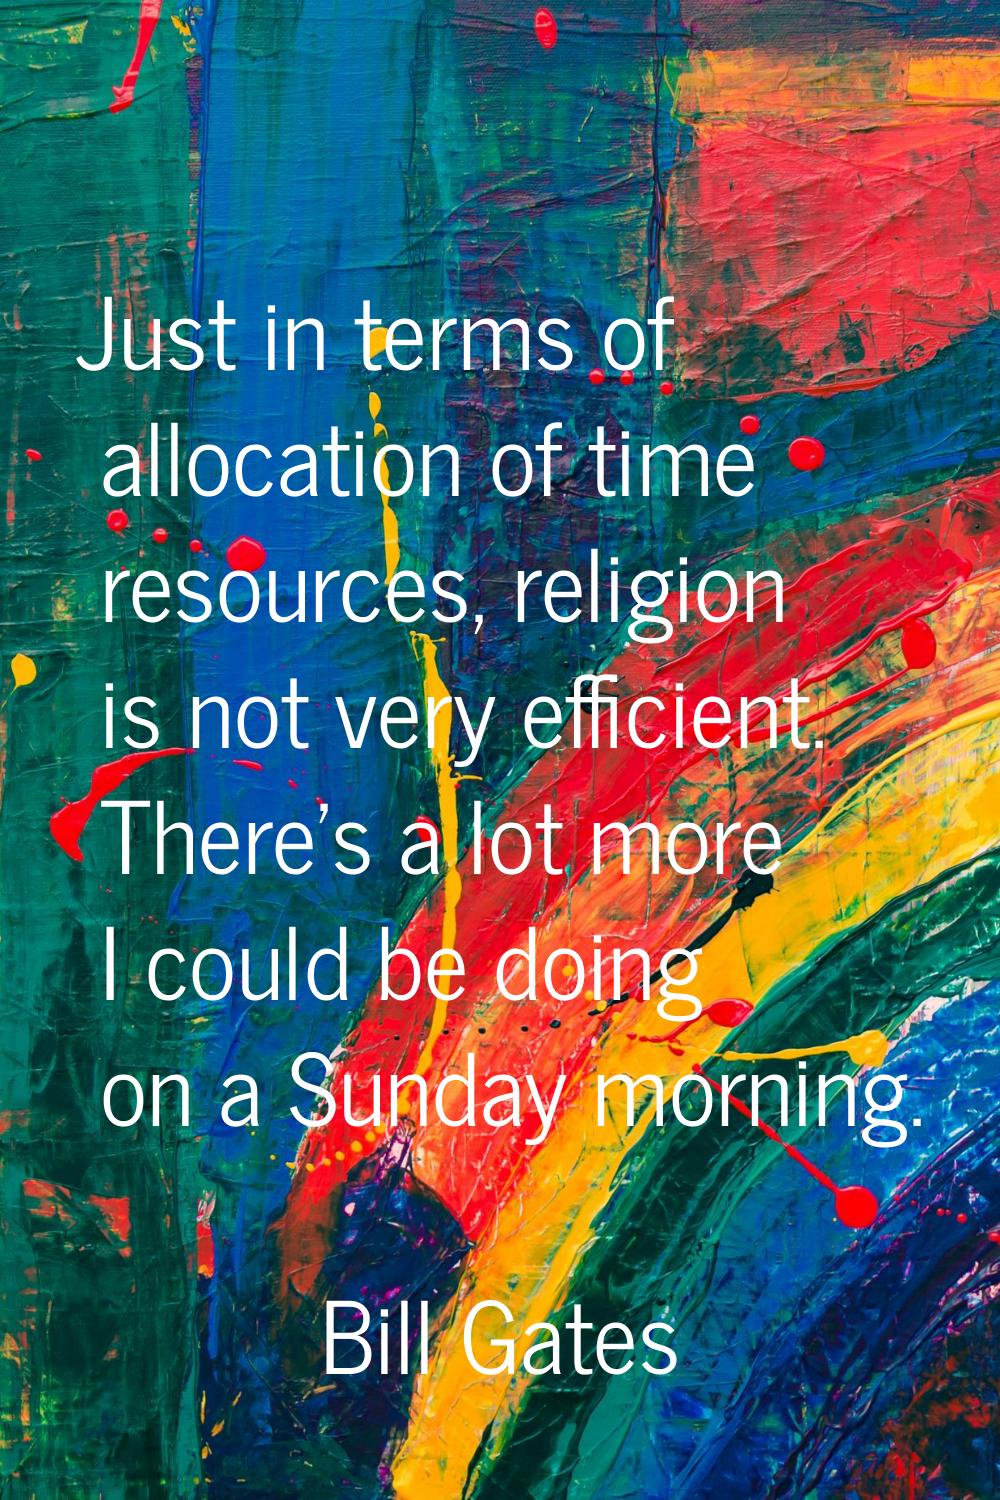 Just in terms of allocation of time resources, religion is not very efficient. There's a lot more I